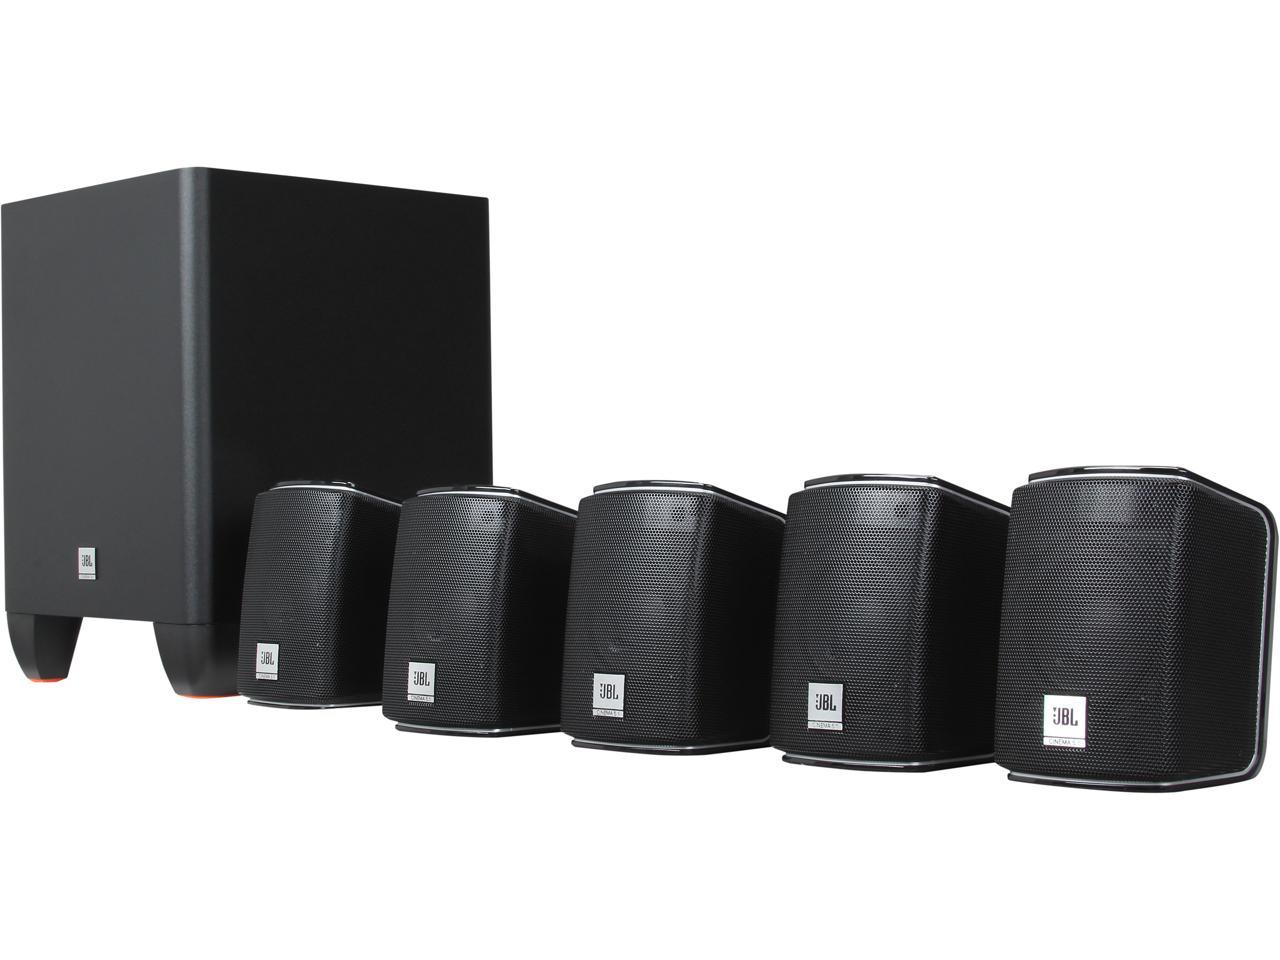 JBL CINEMA 510 5.1 CH Home Theater speakers system with powered subwoofer -  Newegg.com